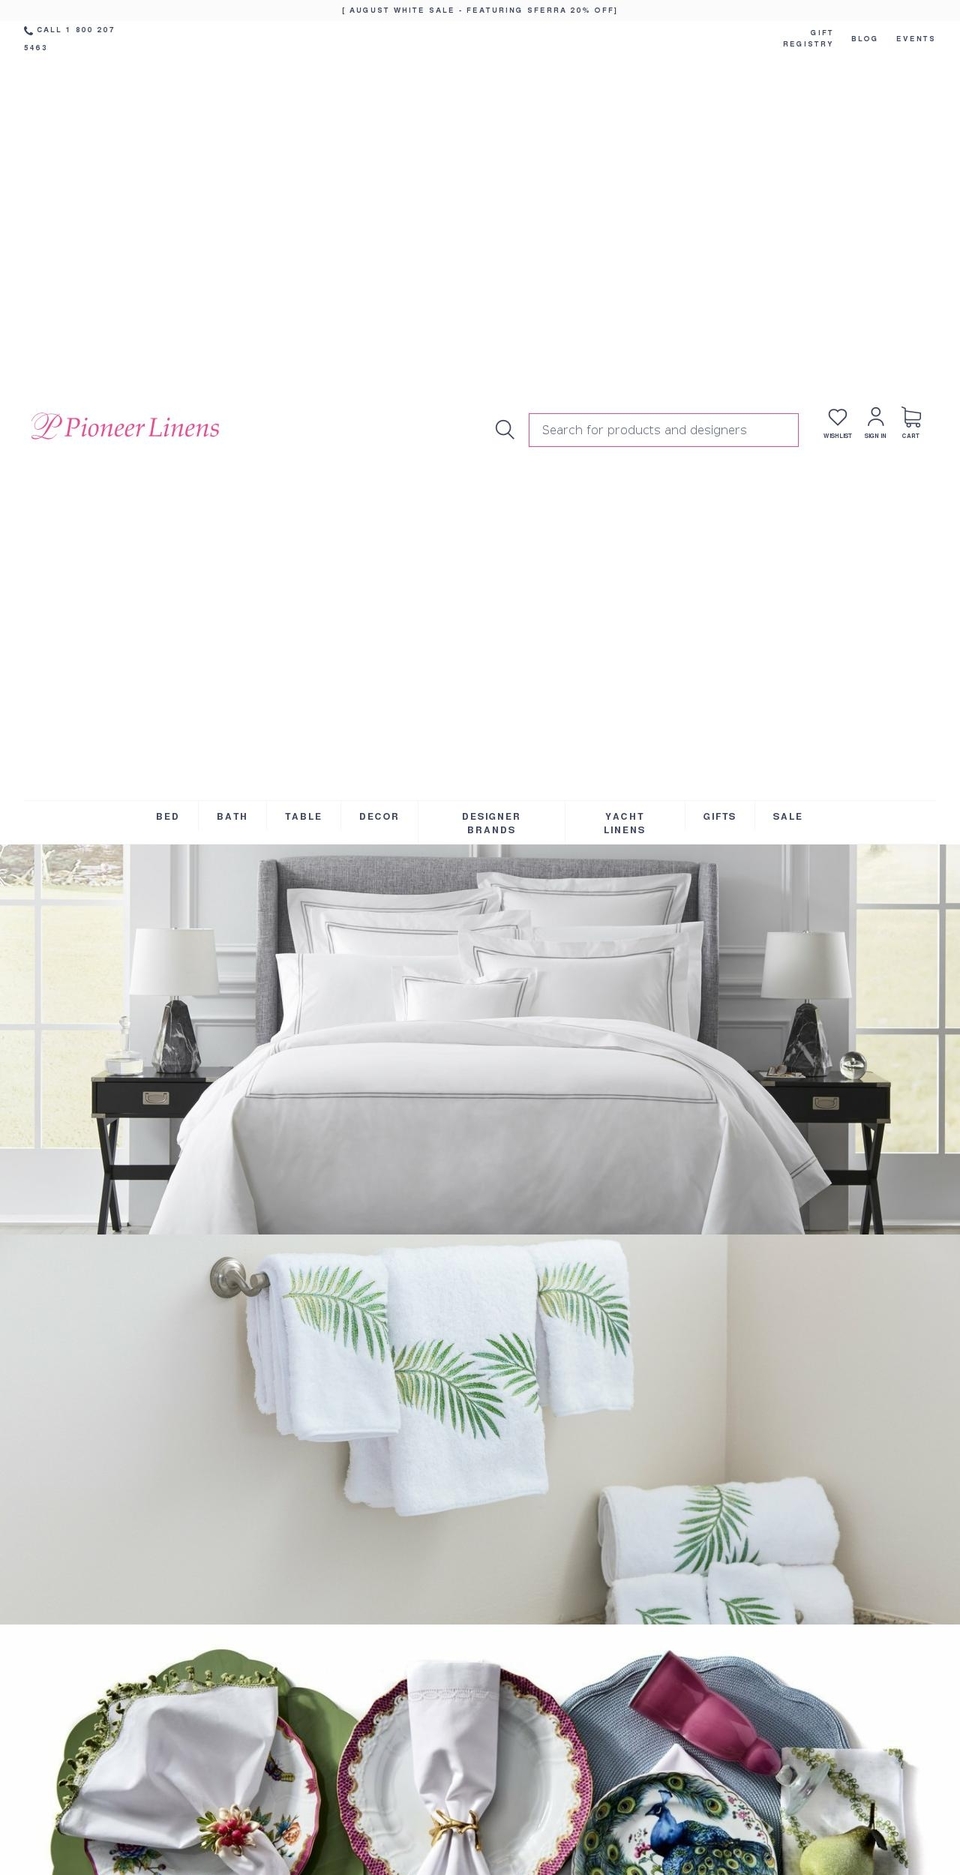 Buko Shopify Theme - Products Consolidation Shopify theme site example v-berthmattress.com